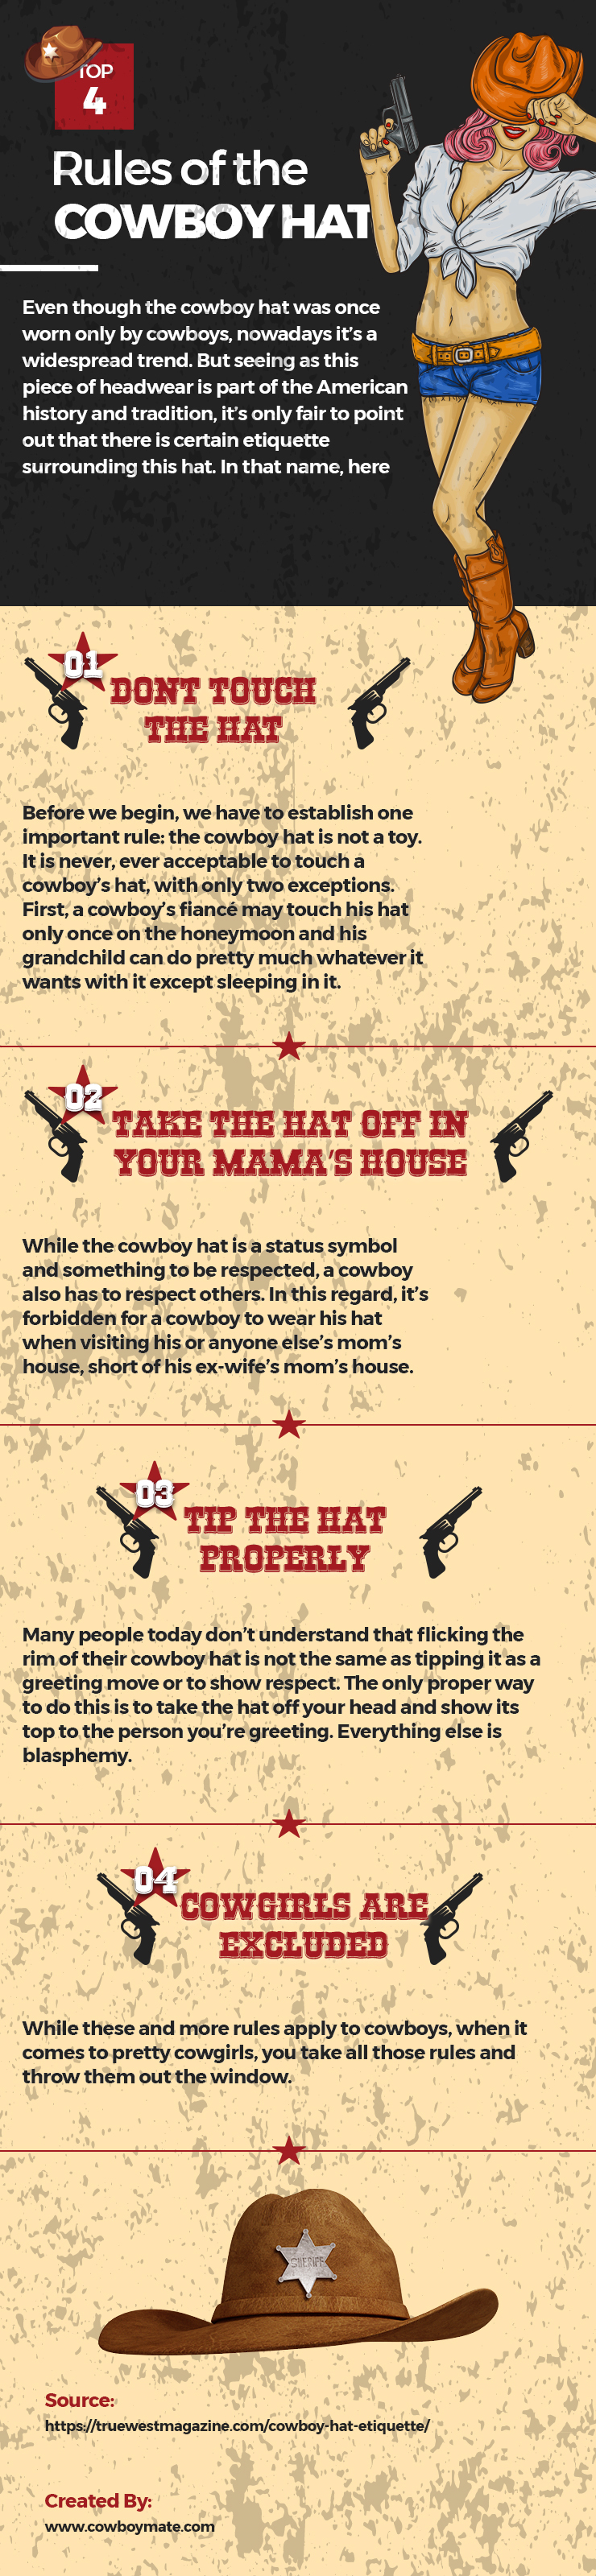 Top 4 Rules of the Cowboy Hat